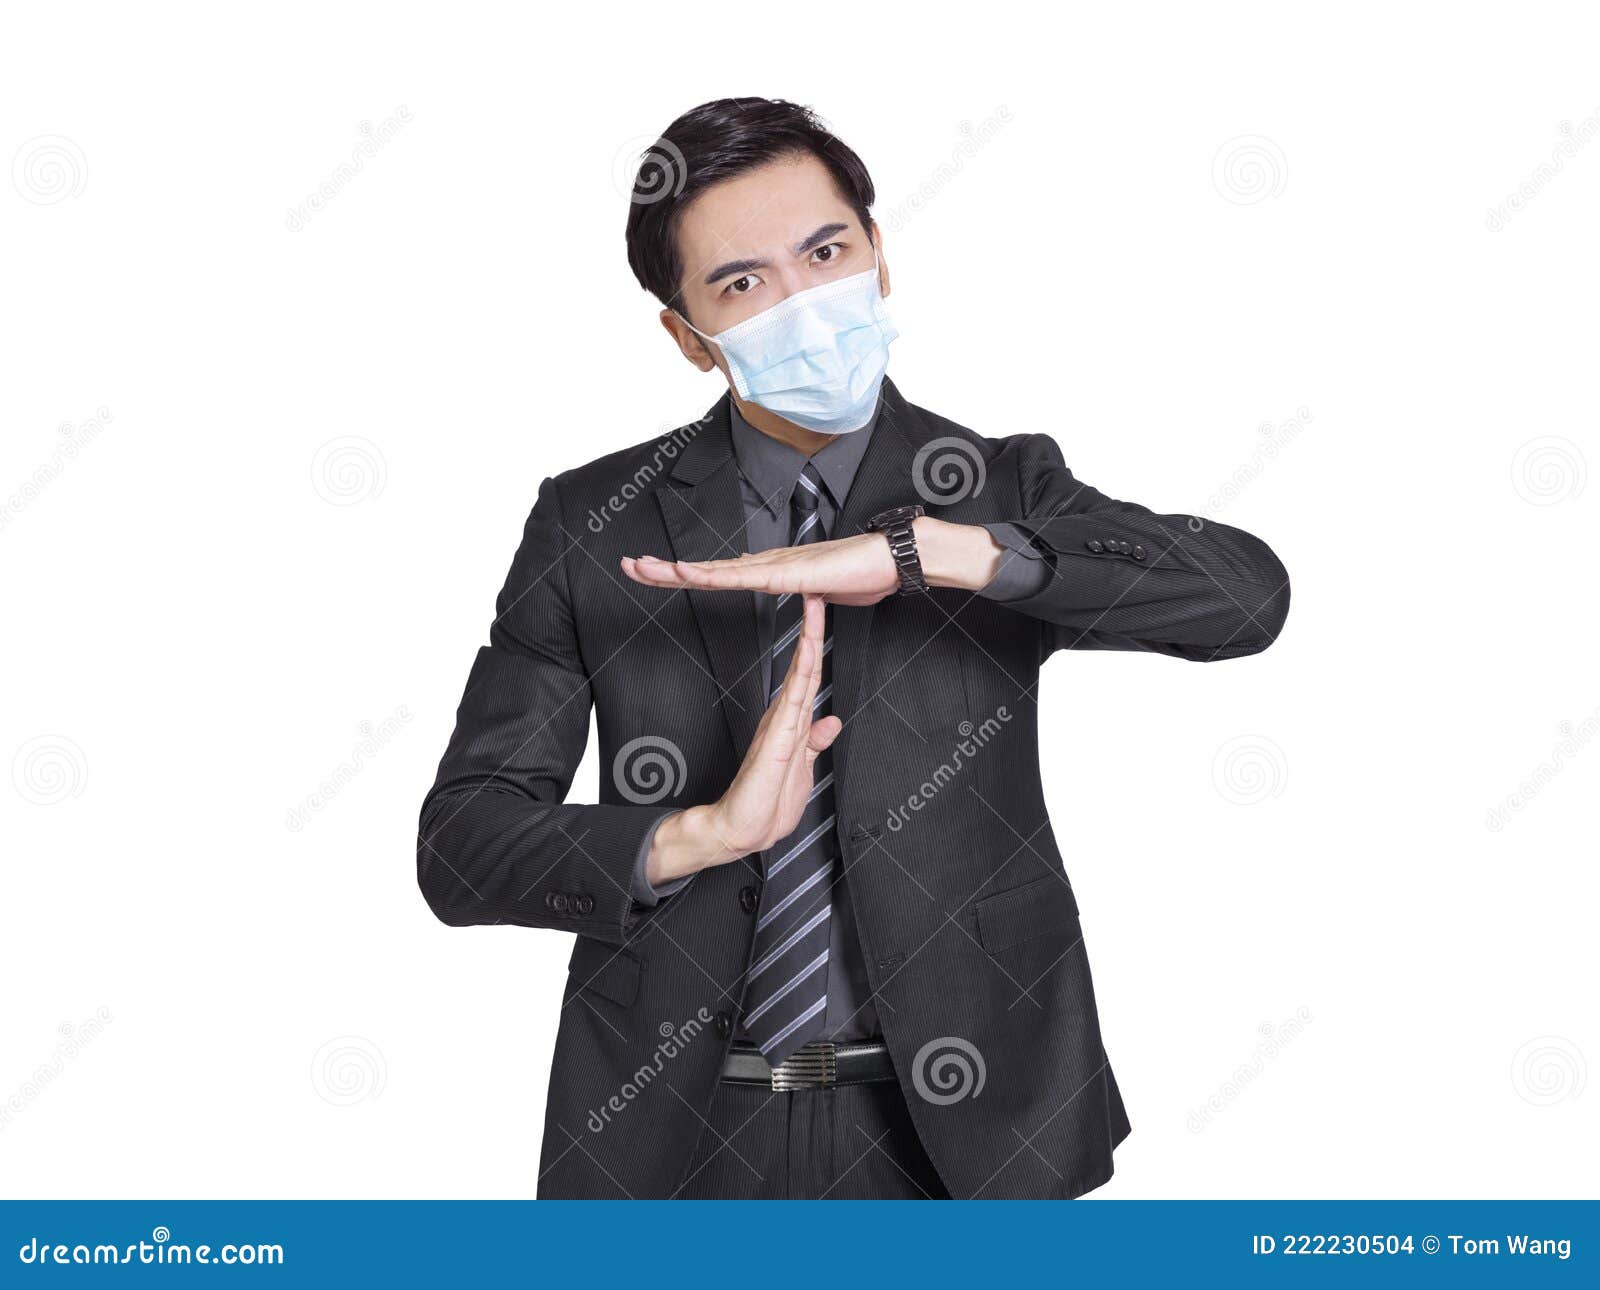 young businessman wearing medical mask tired and bored, making a timeout gesture, needs to stop because of work stress